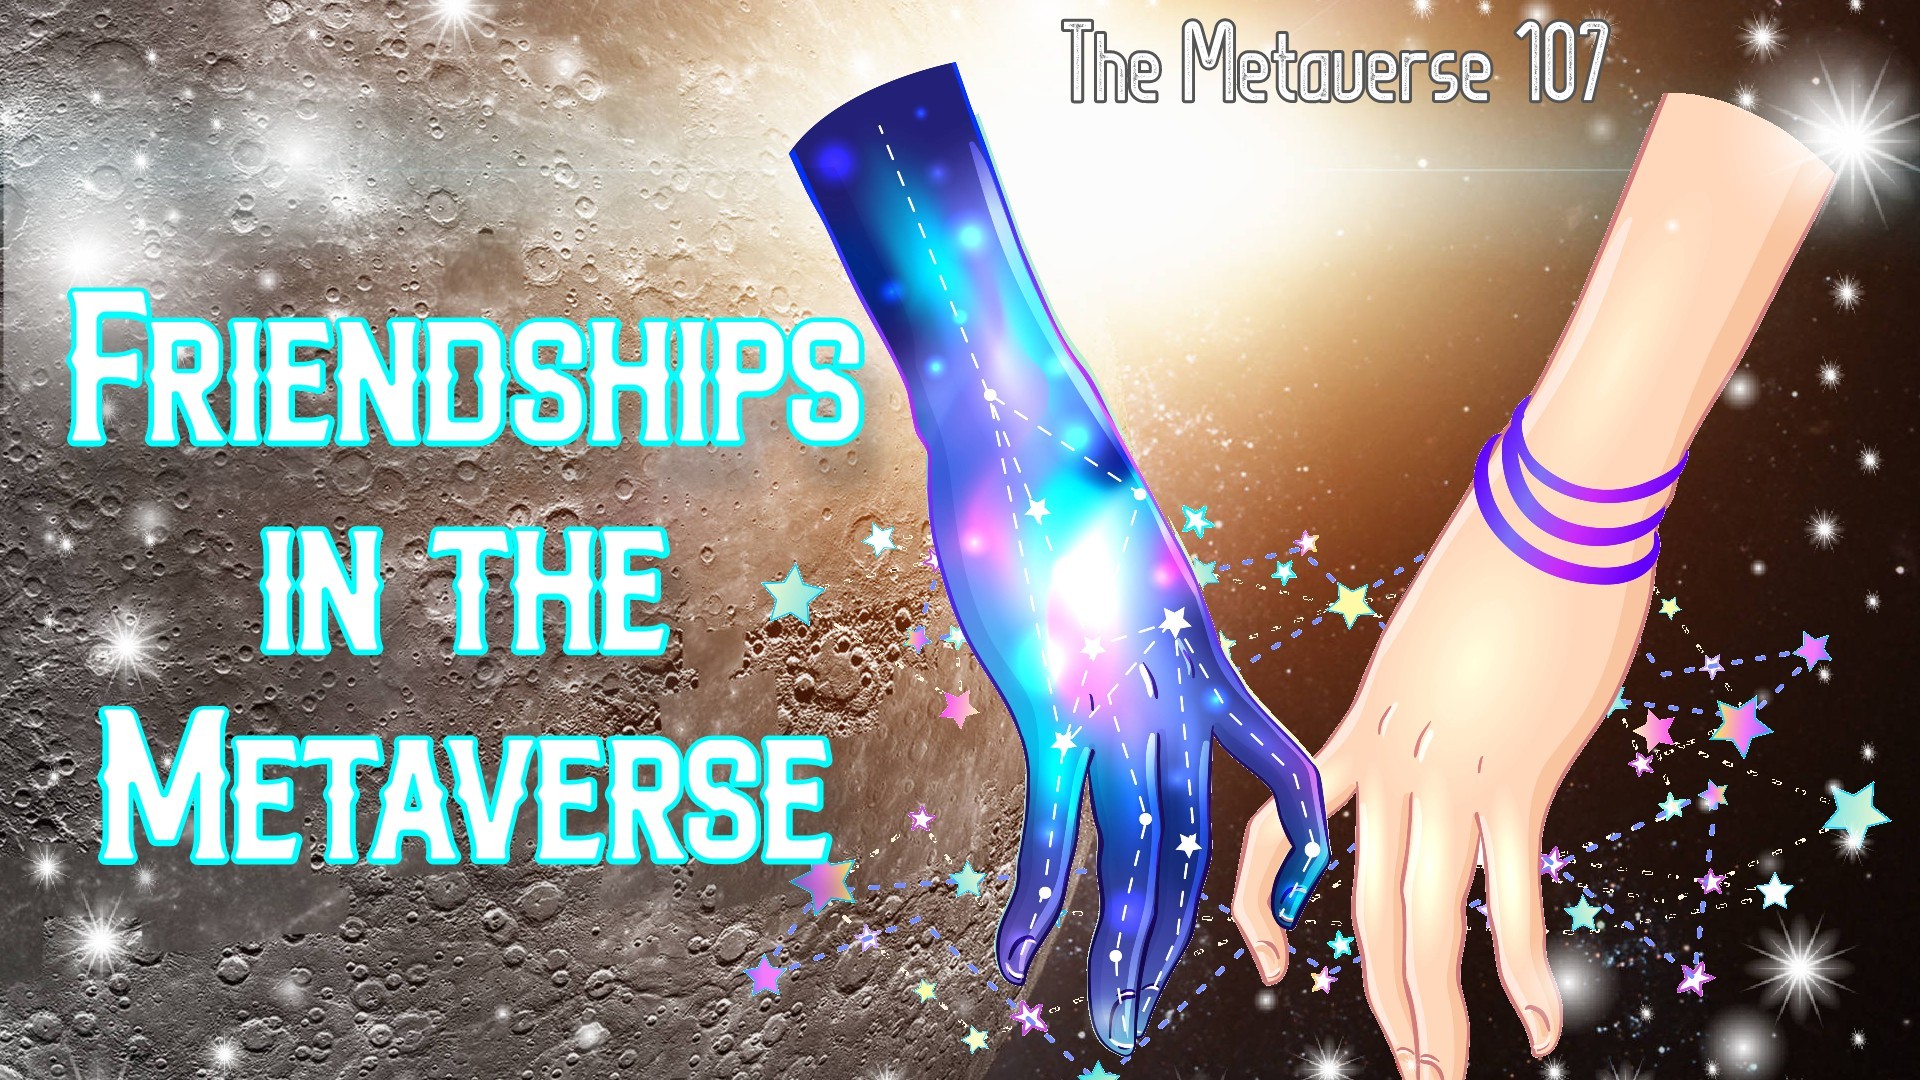 The Metaverse 107: Friendships in the Metaverse